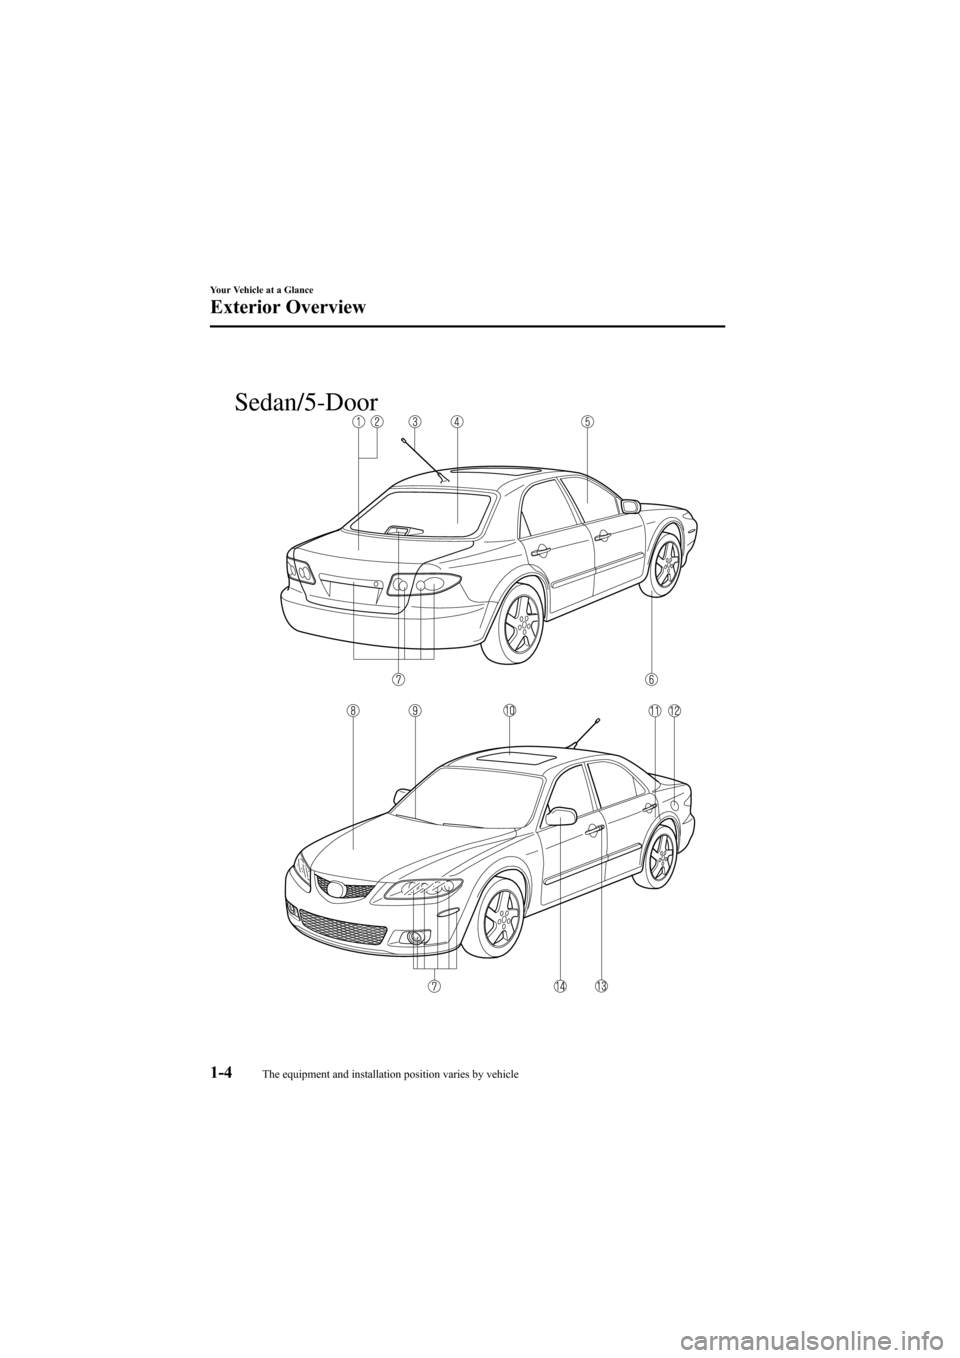 MAZDA MODEL 6 2008  Owners Manual (in English) Black plate (10,1)
Sedan/5-Door
1-4
Your Vehicle at a Glance
The equipment and installation position varies by vehicle
Exterior Overview
Mazda6_8X47-EA-07G_Edition1 Page10
Tuesday, May 29 2007 3:42 PM